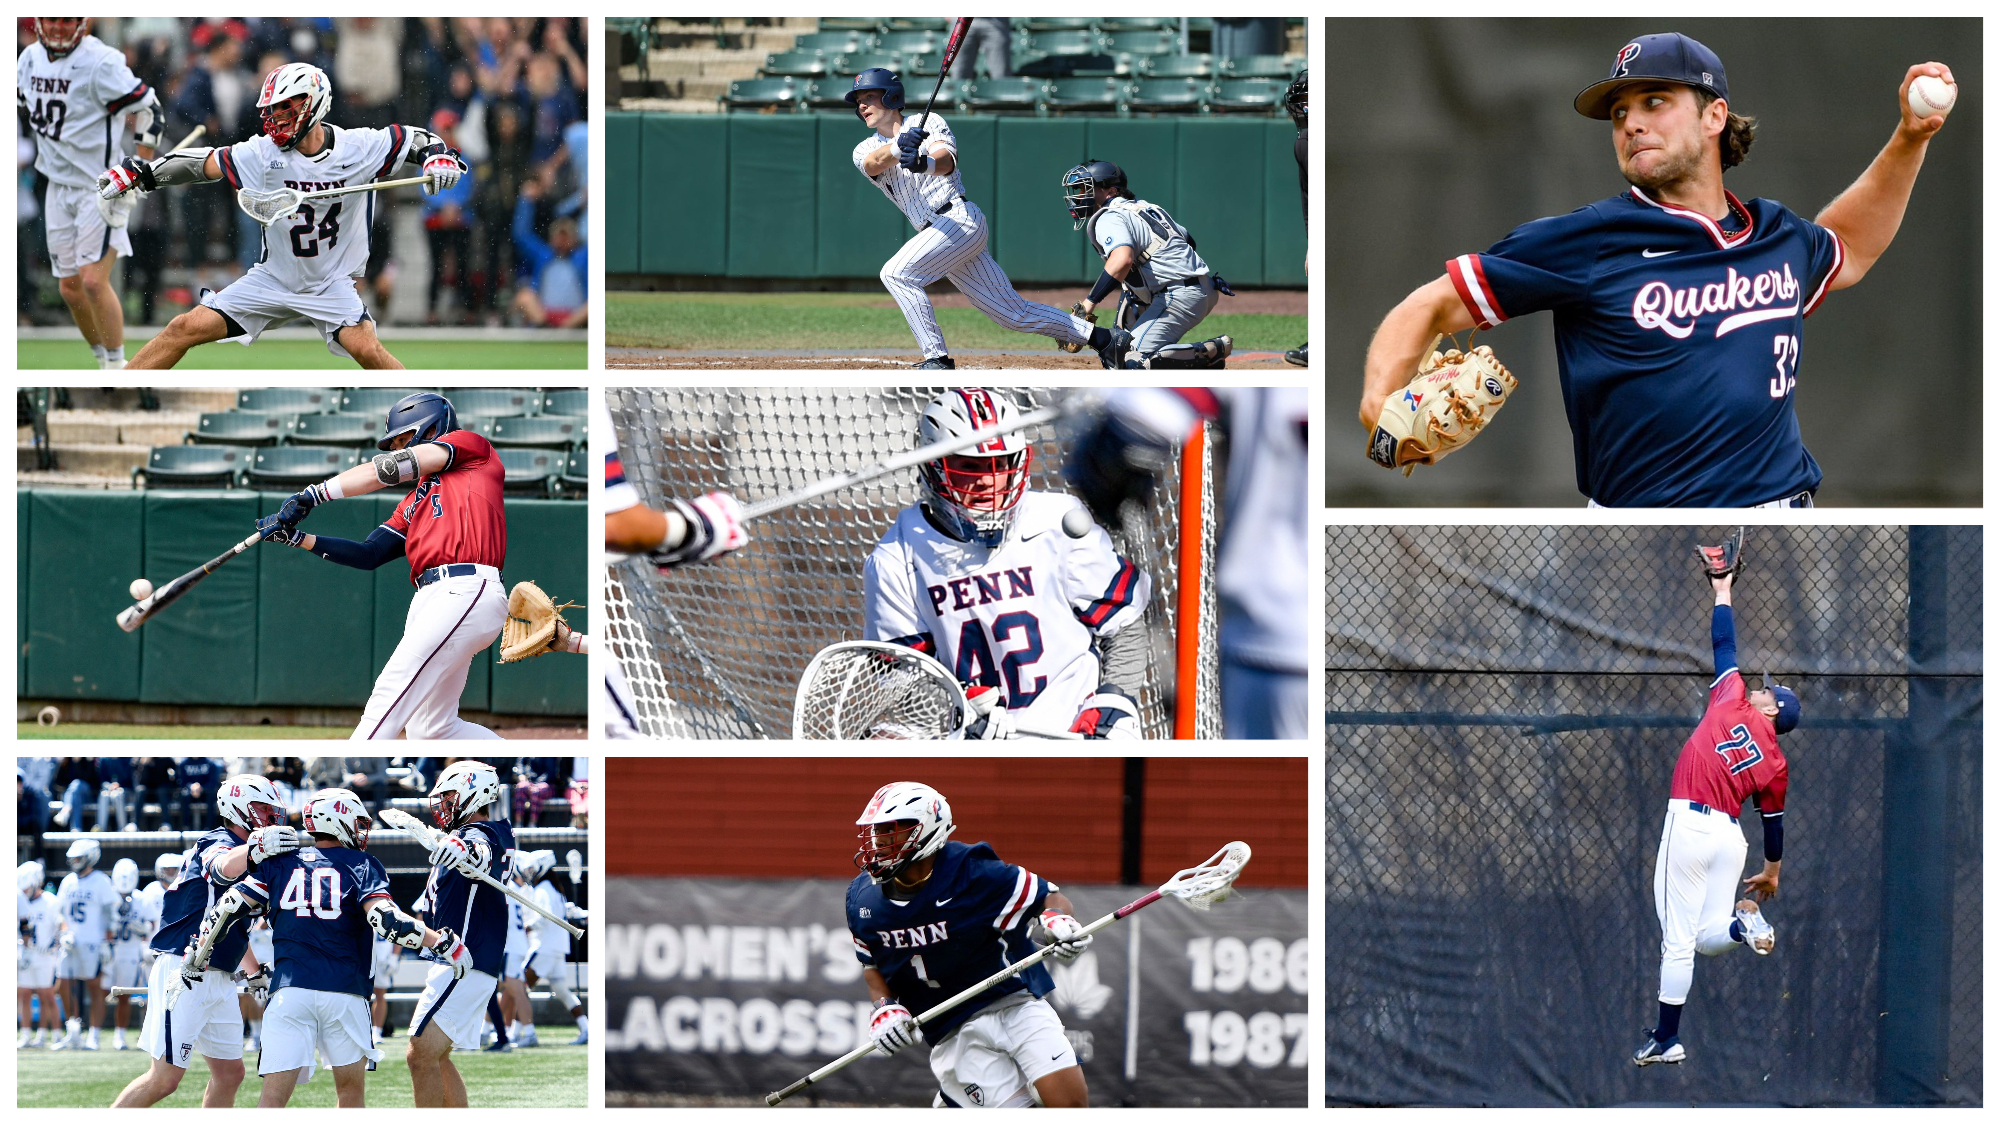 A grid showing athletes competing in baseball and men's lacrosse.